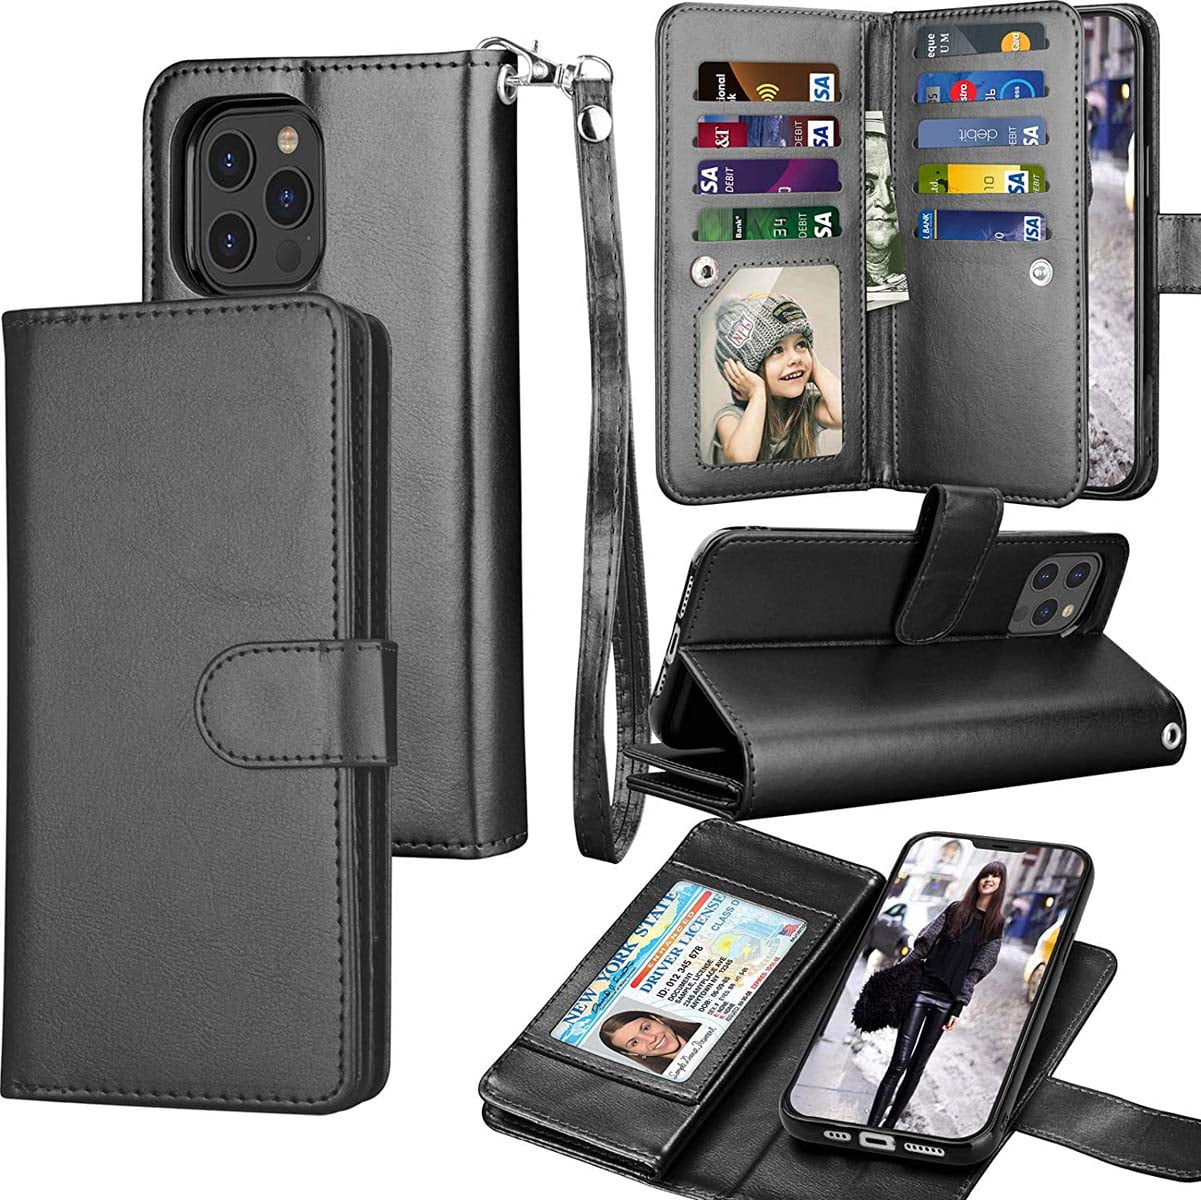 wallet case leather folio iphone card holder mini pro credit max flip carrying luxury pouch detachable tekcoo hard magnetic cash